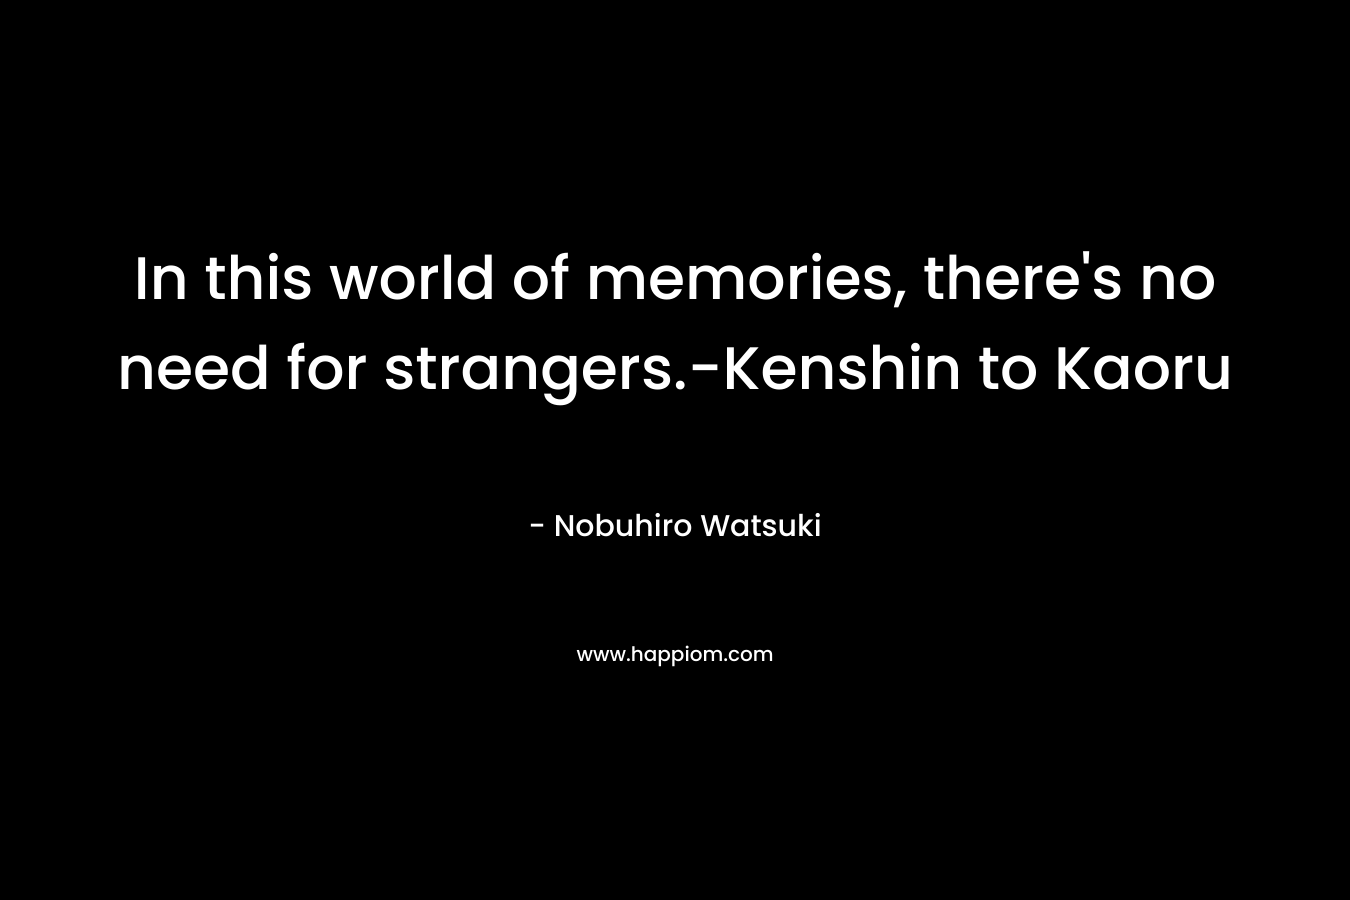 In this world of memories, there's no need for strangers.-Kenshin to Kaoru